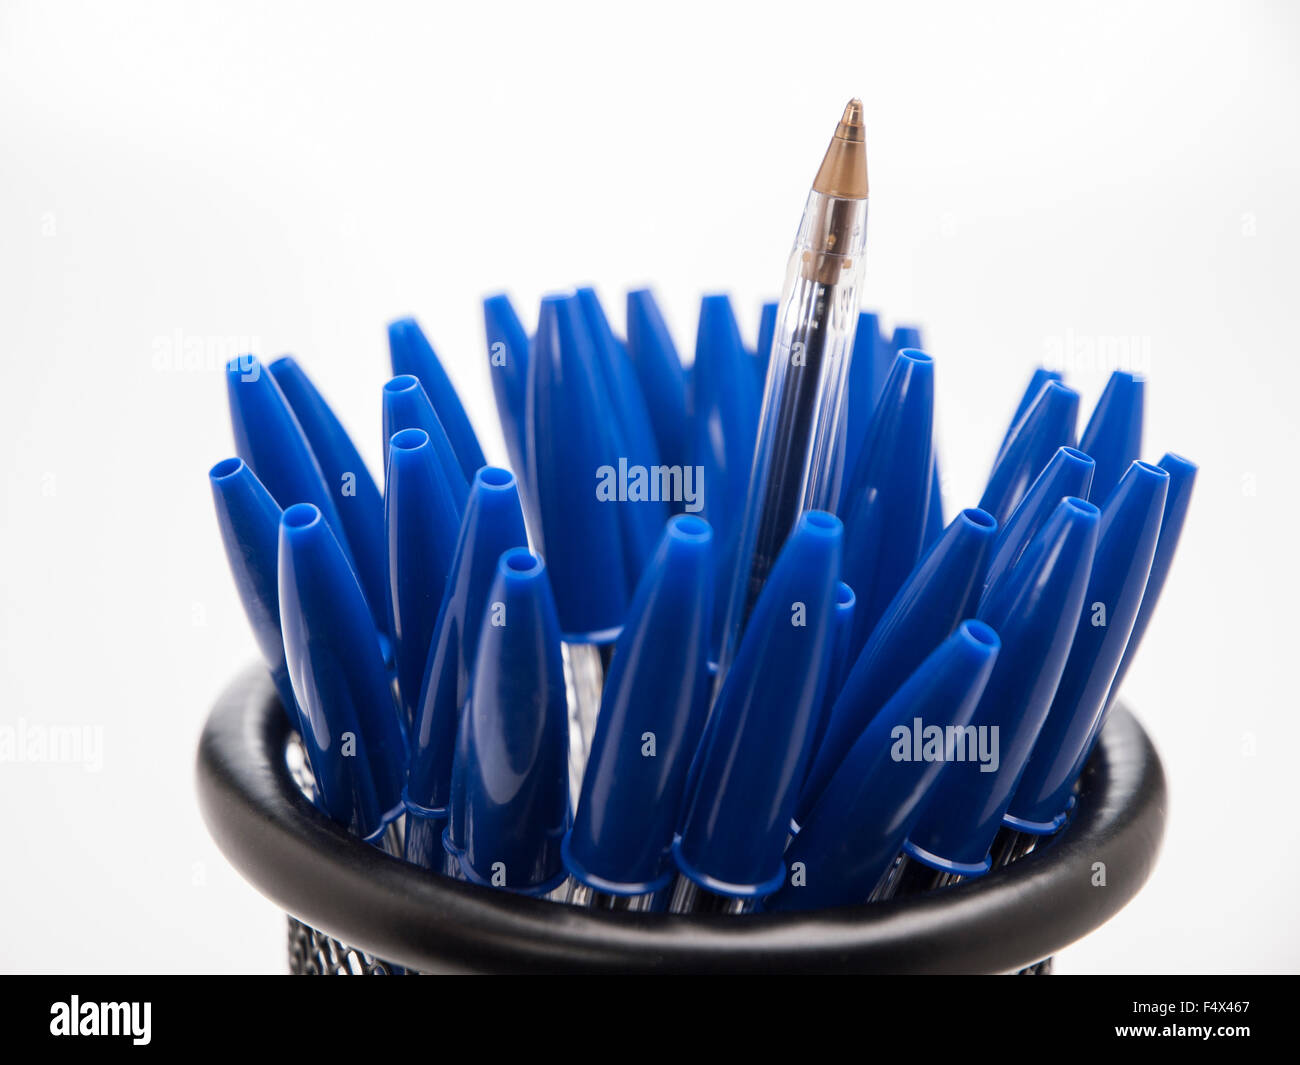 Bic Crystal Blue pens in pencil case Stock Photo